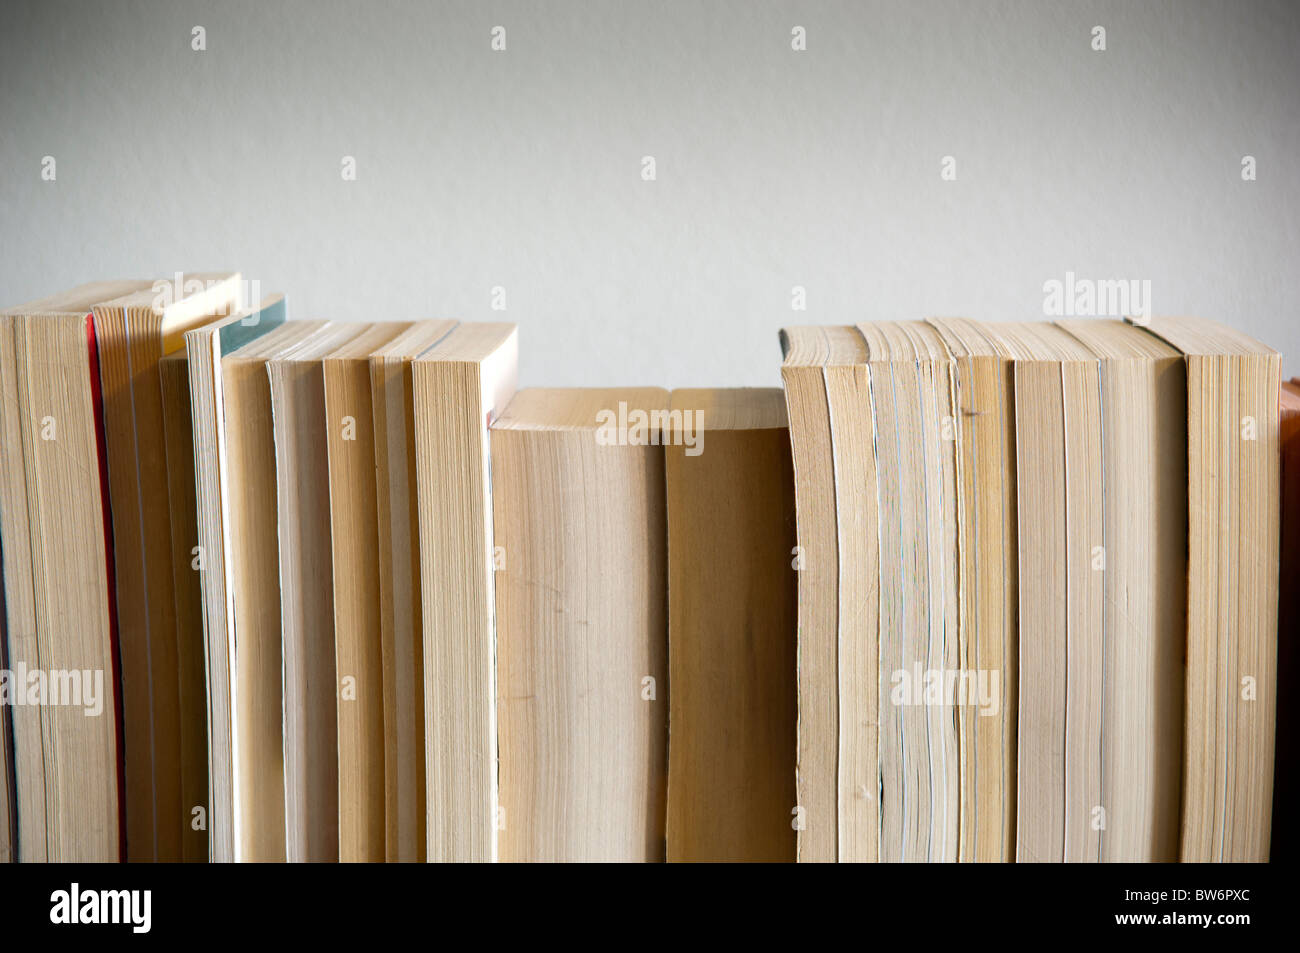 A row of books sits on a timber table with blank space behind Stock Photo